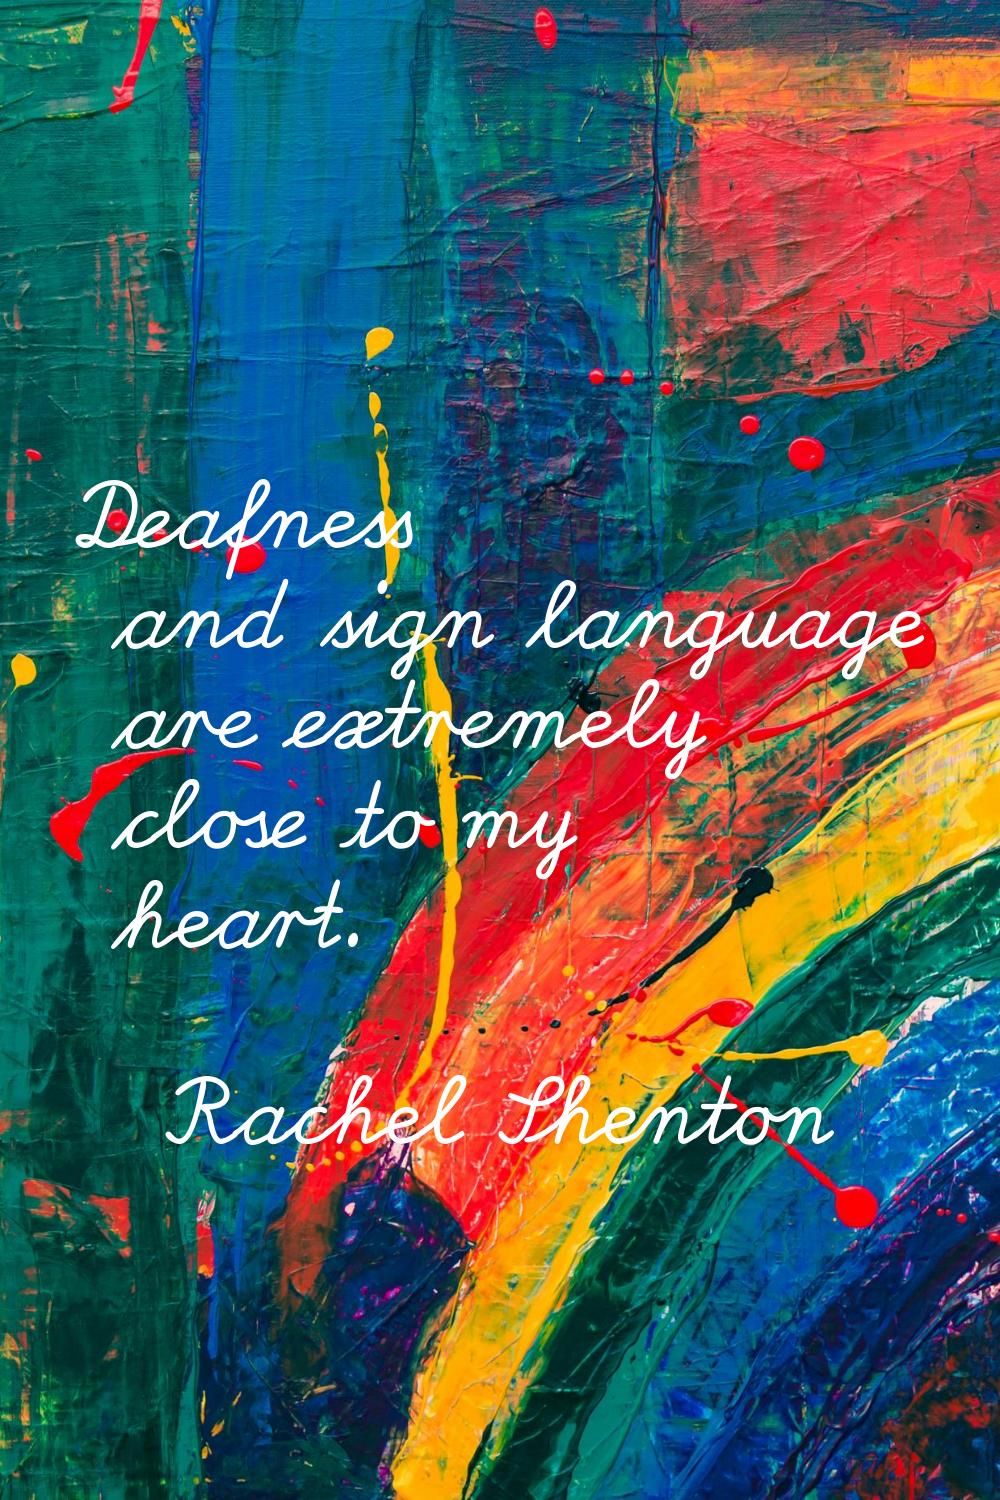 Deafness and sign language are extremely close to my heart.